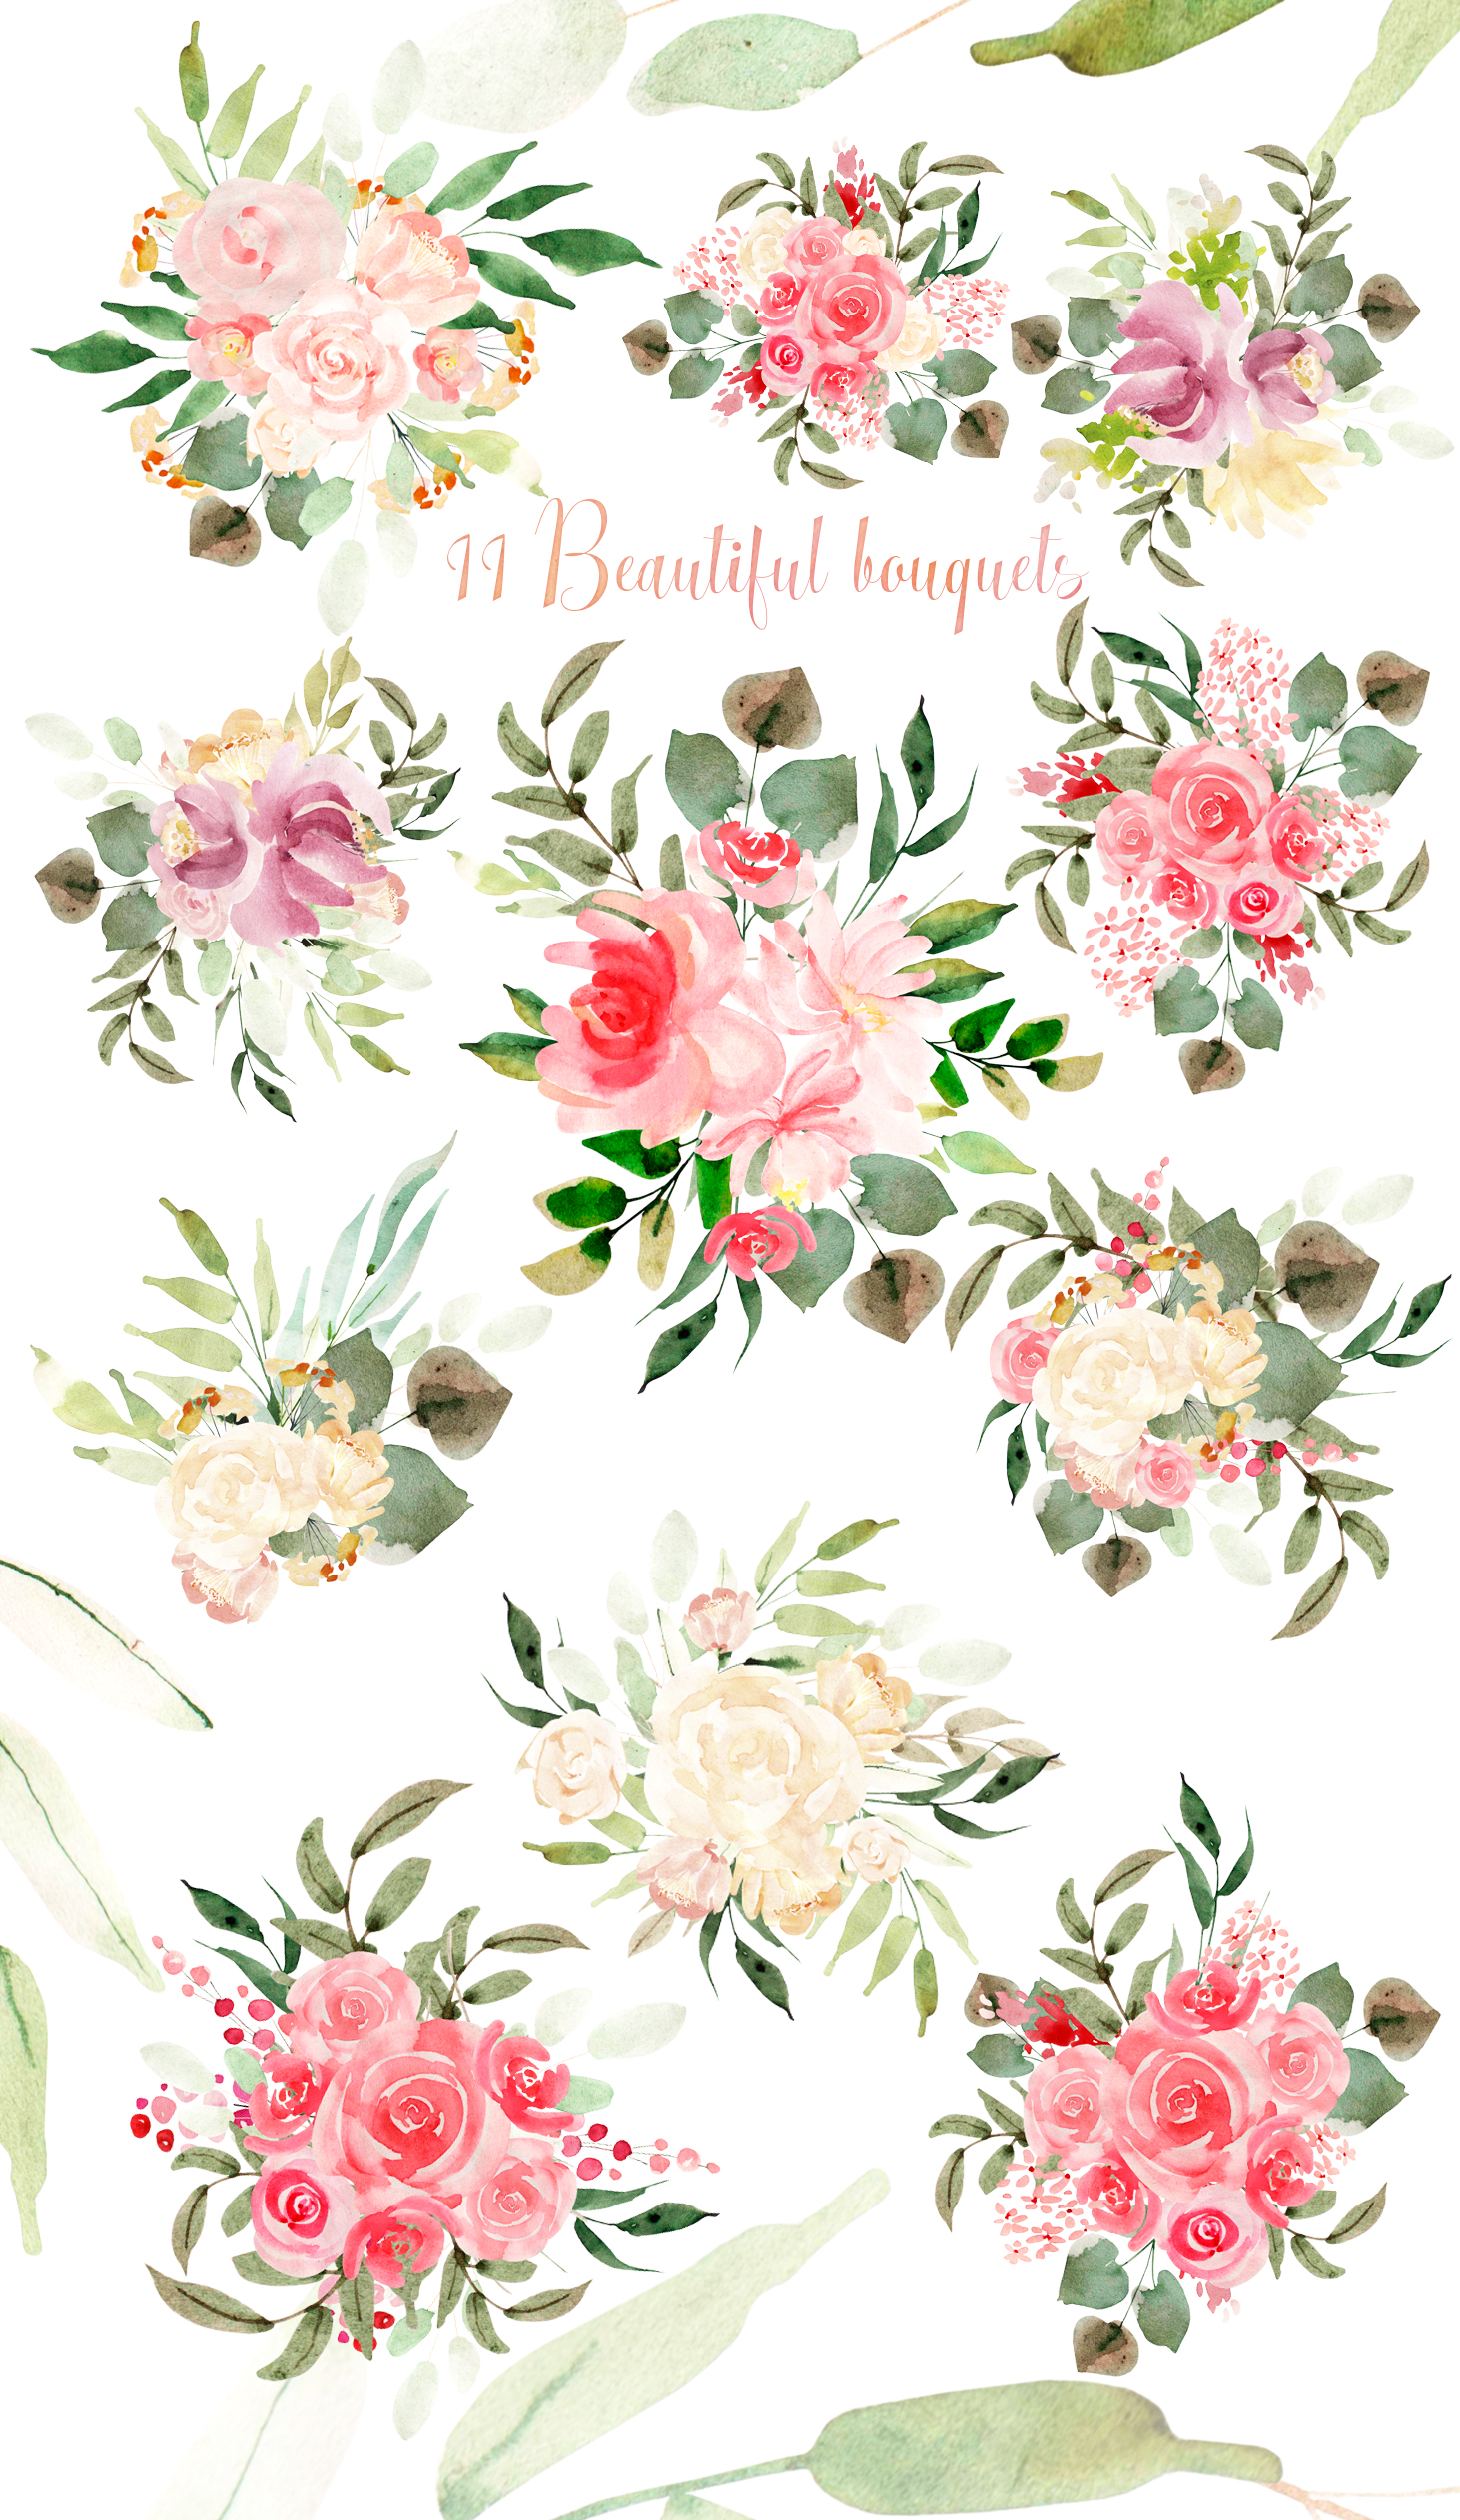 Download Hand Drawn Watercolor Flowers 86 PNG (25622 ...